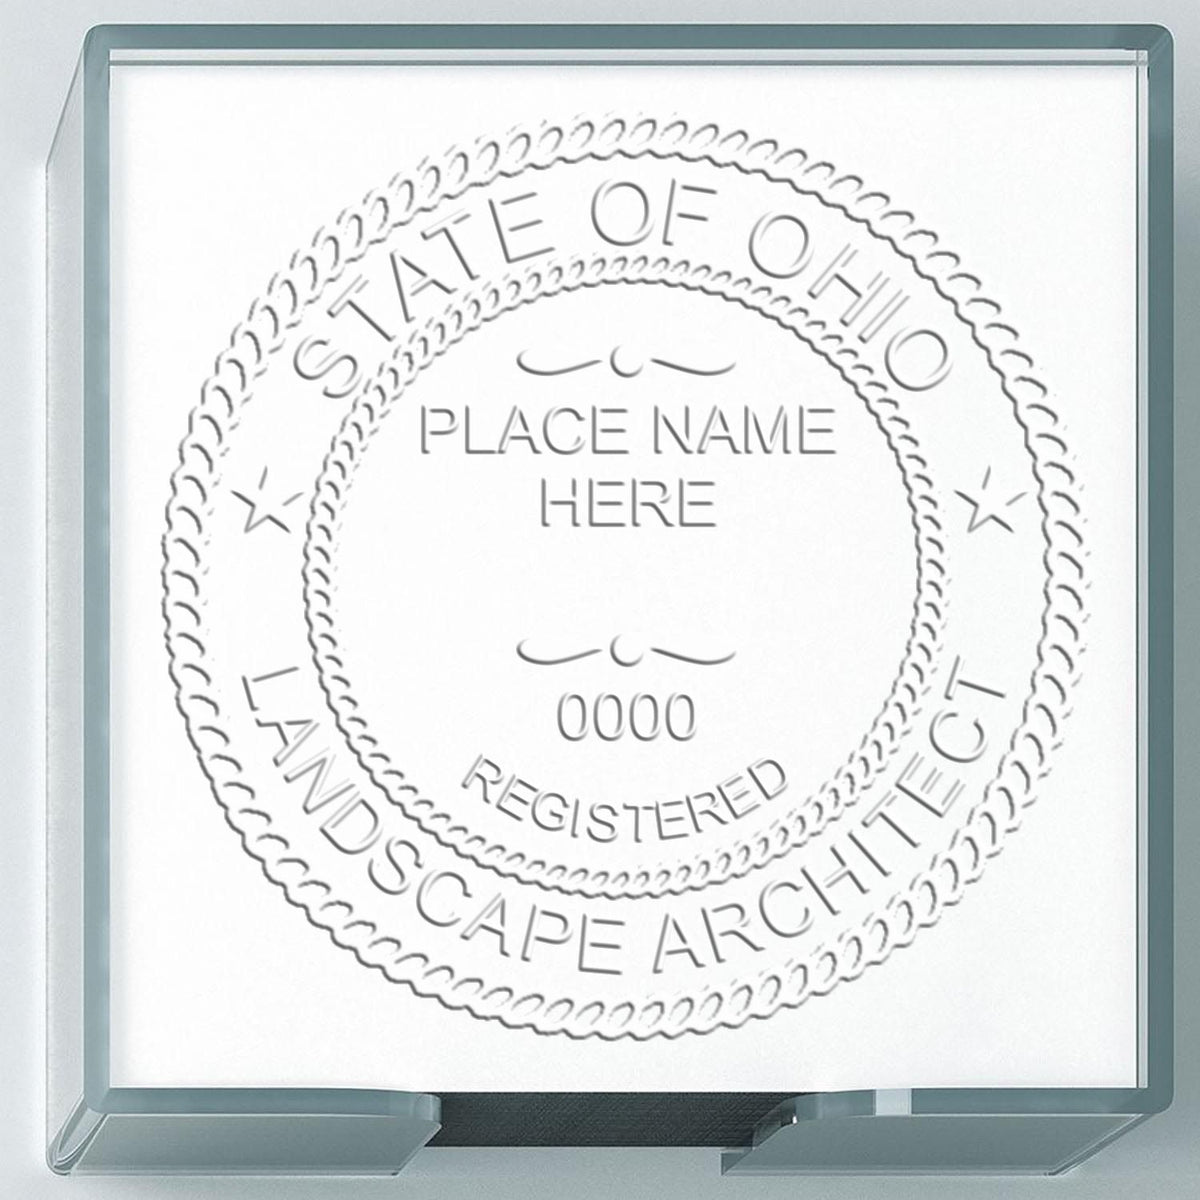 A stamped impression of the Soft Pocket Ohio Landscape Architect Embosser in this stylish lifestyle photo, setting the tone for a unique and personalized product.